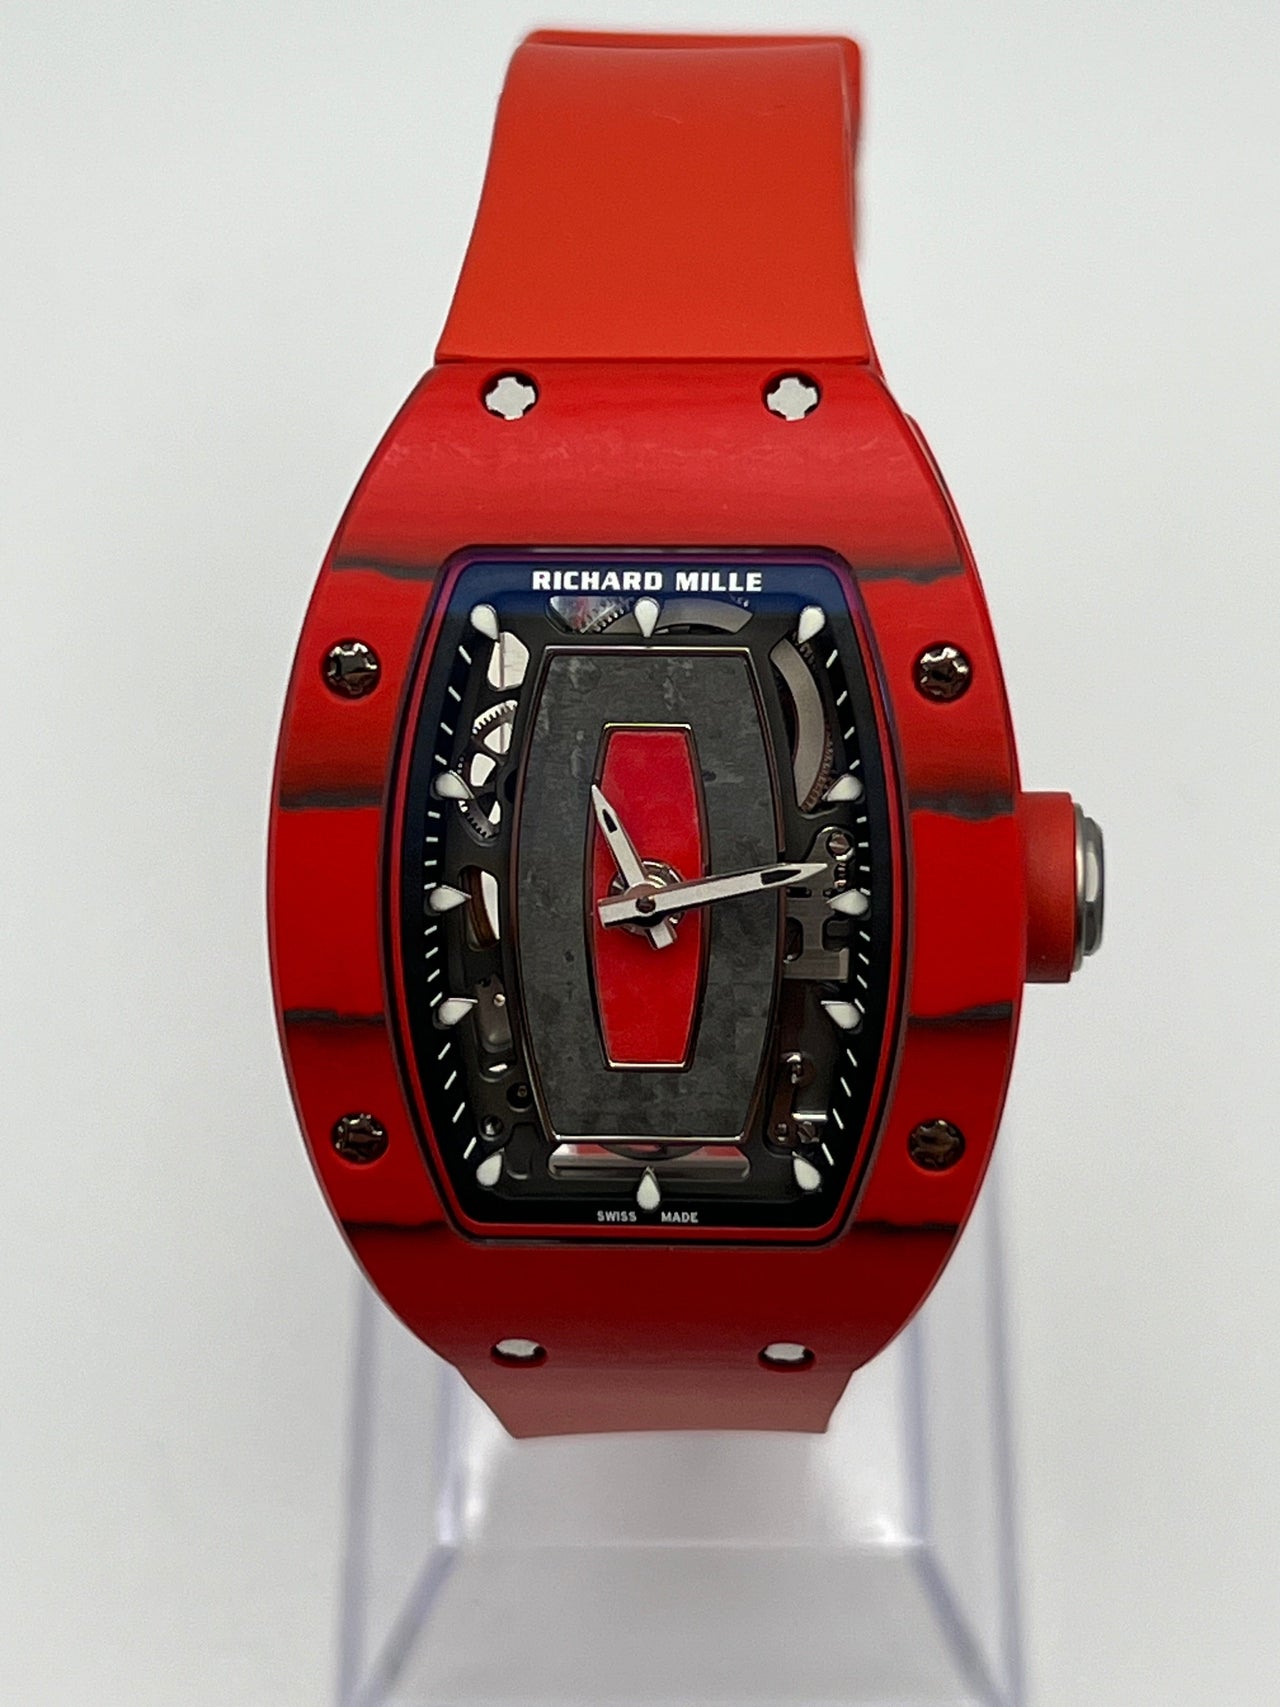 Richard Mille RM 07-01 Ladies' Carbon and Red Quartz TPT Limited Edition